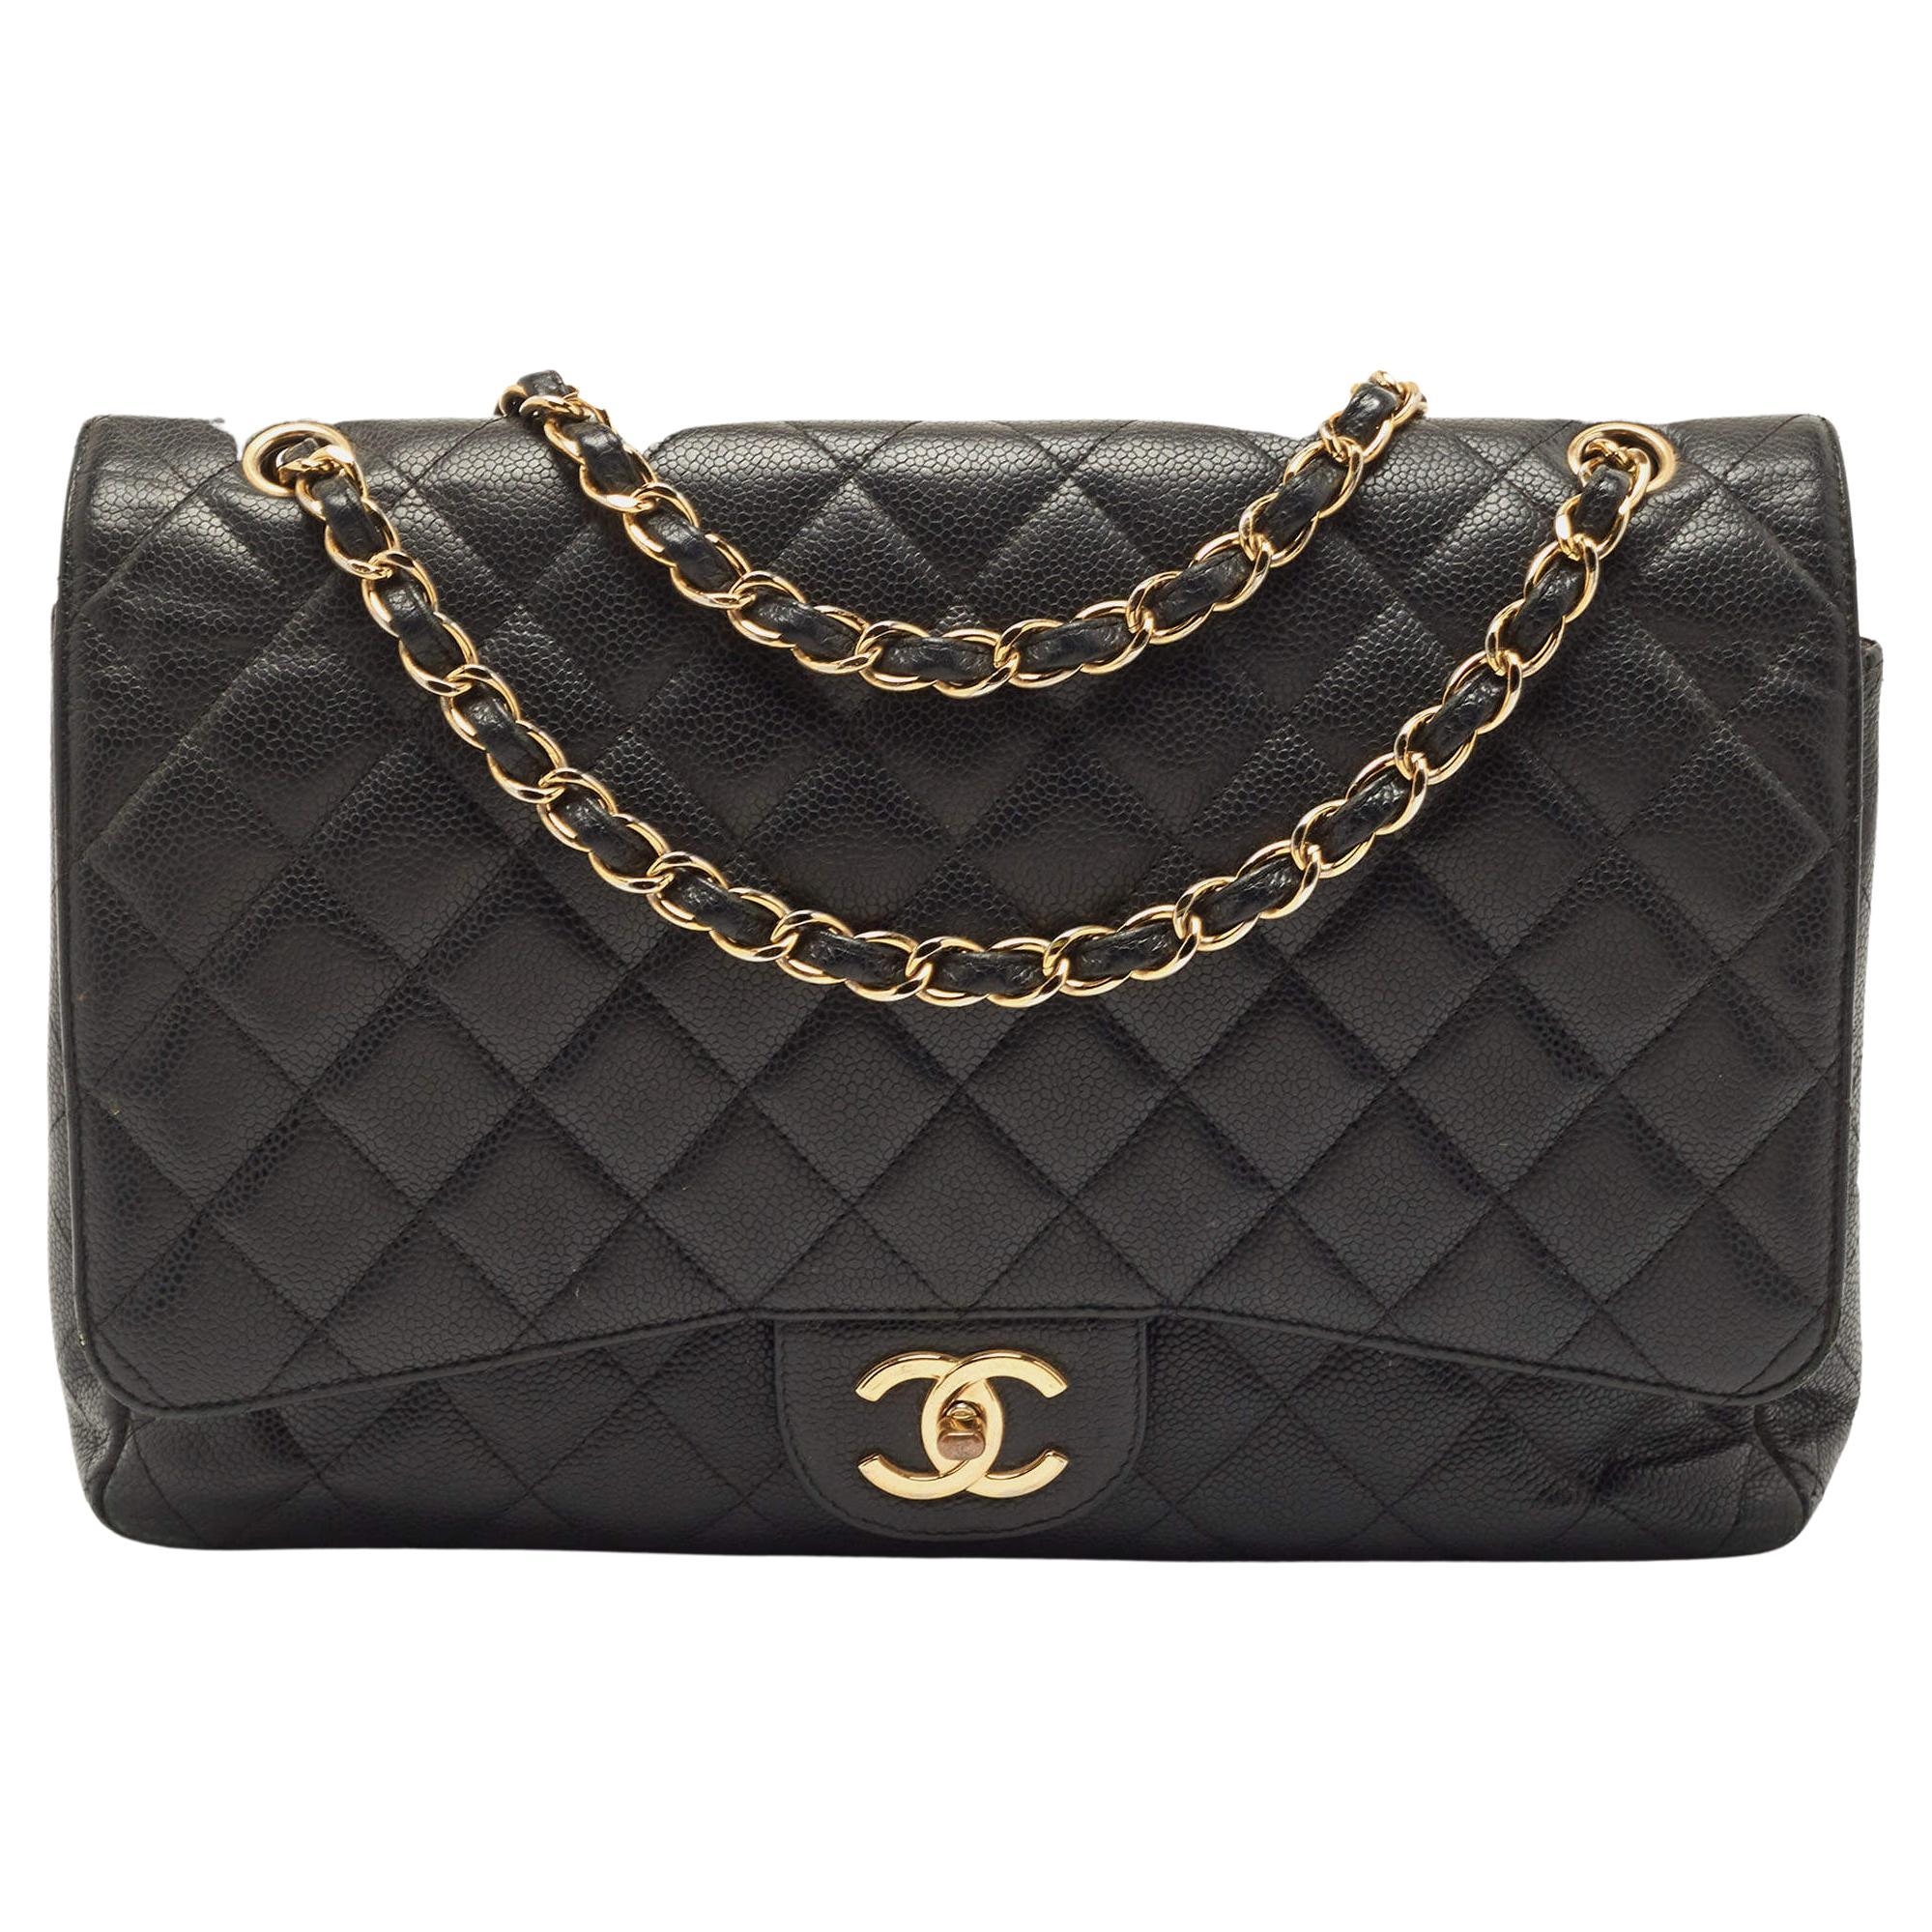 CHANEL 21K Micro Flap Bag w/ Top Handle & Chain *New - Timeless